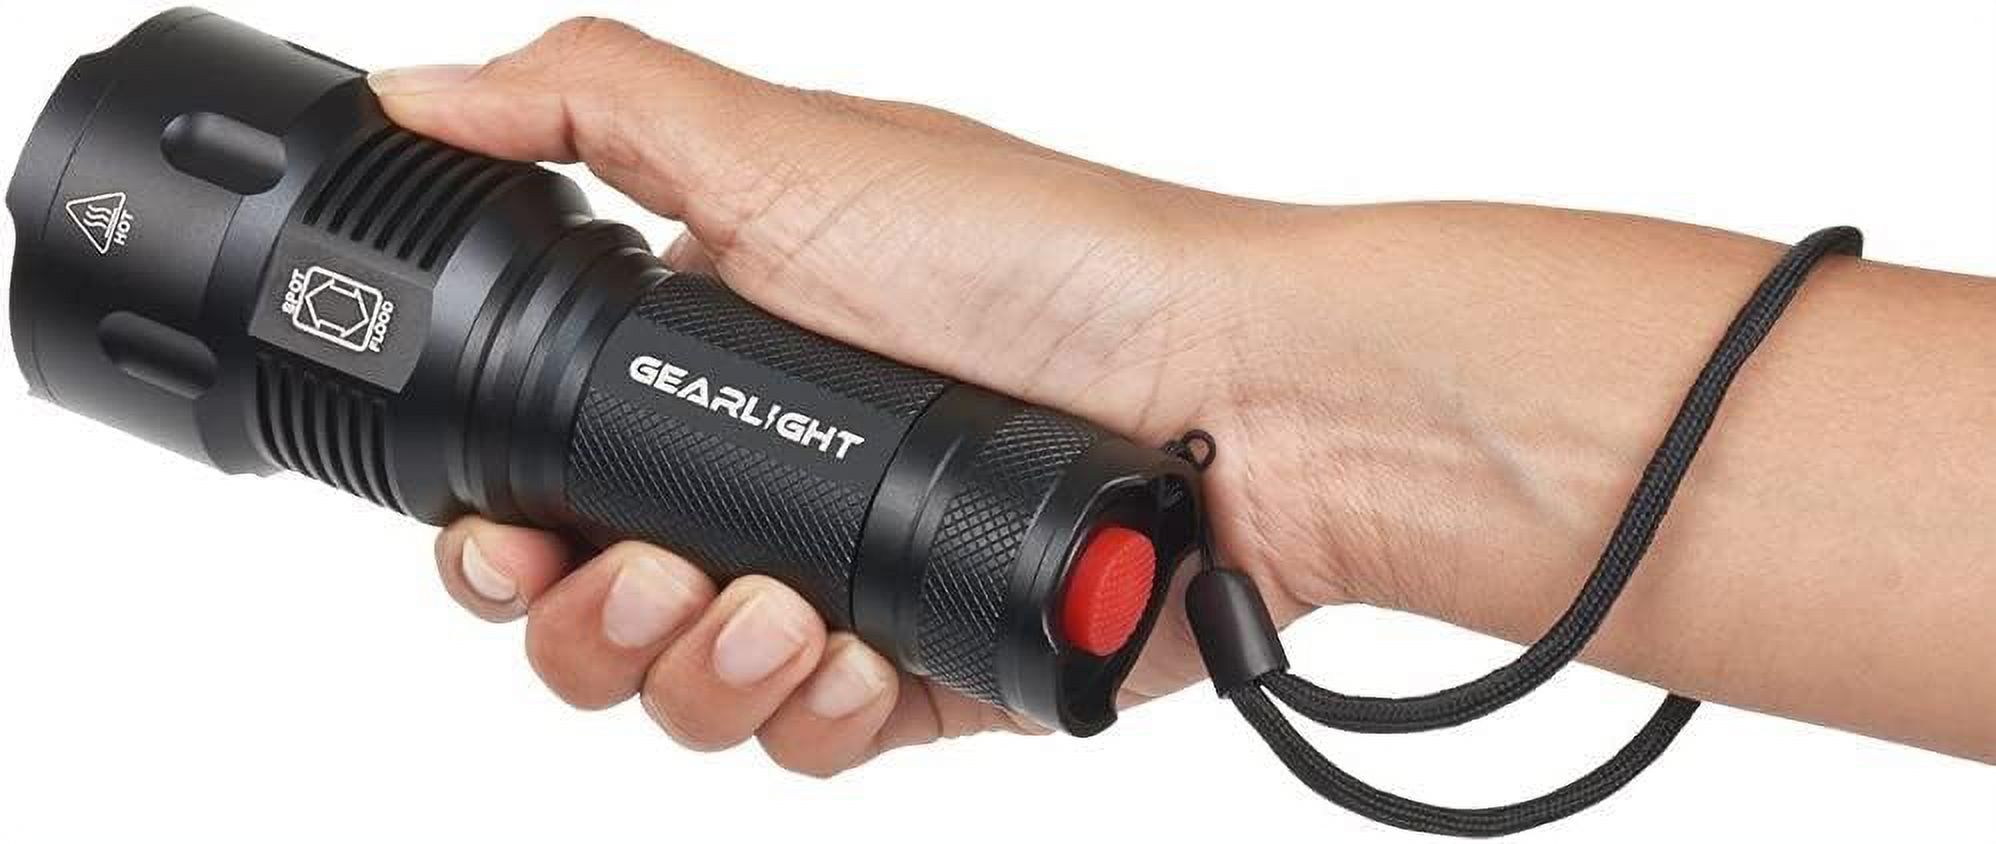 GearLight High-Powered LED Flashlight S1200 - Mid Size, Zoomable, Water Resistant, Handheld Light - High Lumen Camping, Outdoor, Emergency Flashlights - image 2 of 6